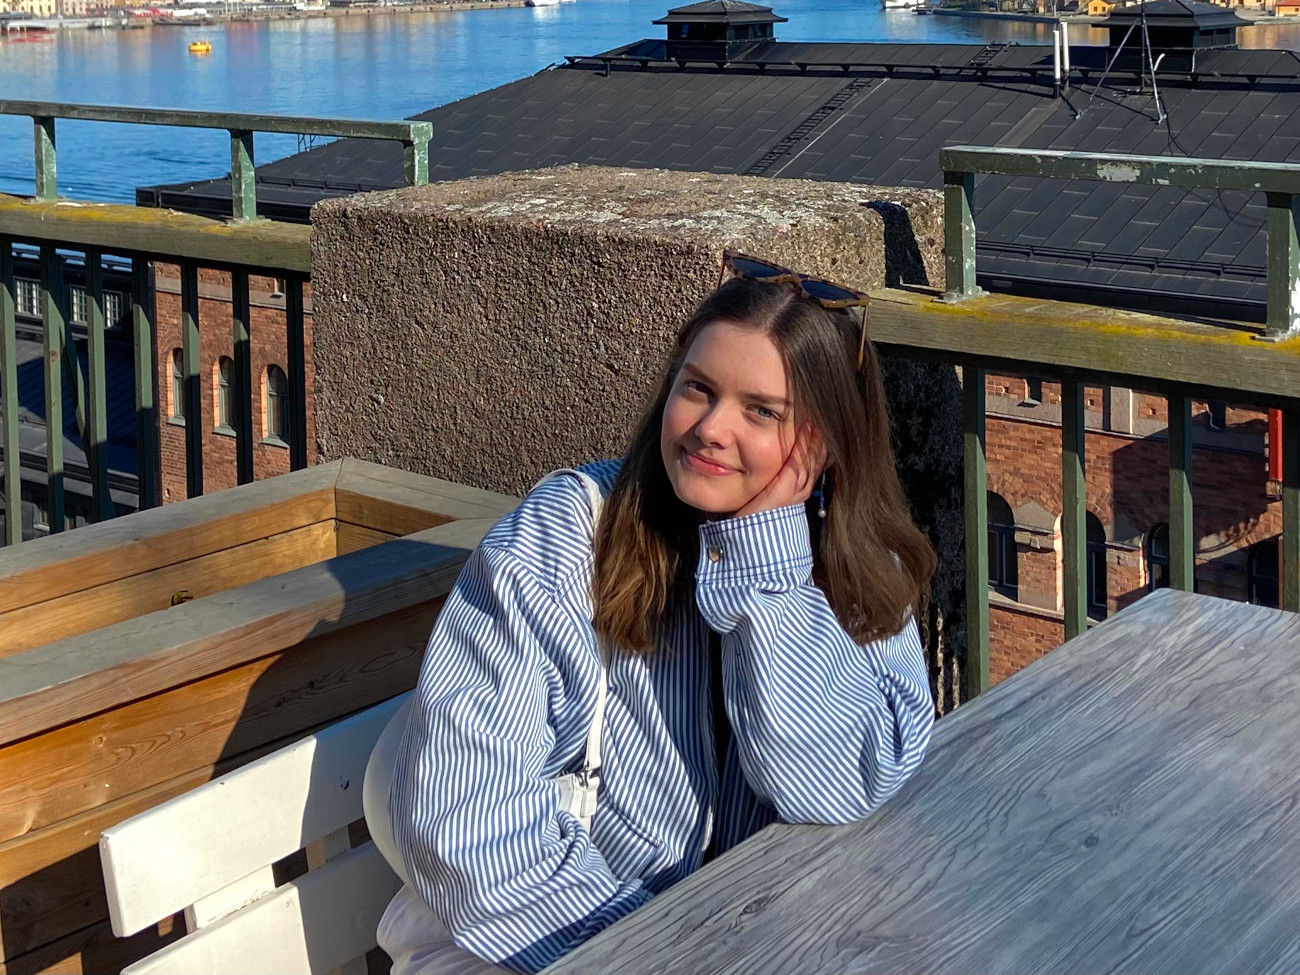 Hannah Bruns in a blue and white striped jacket sits at a table on a terrace. In the background, you can see a river.